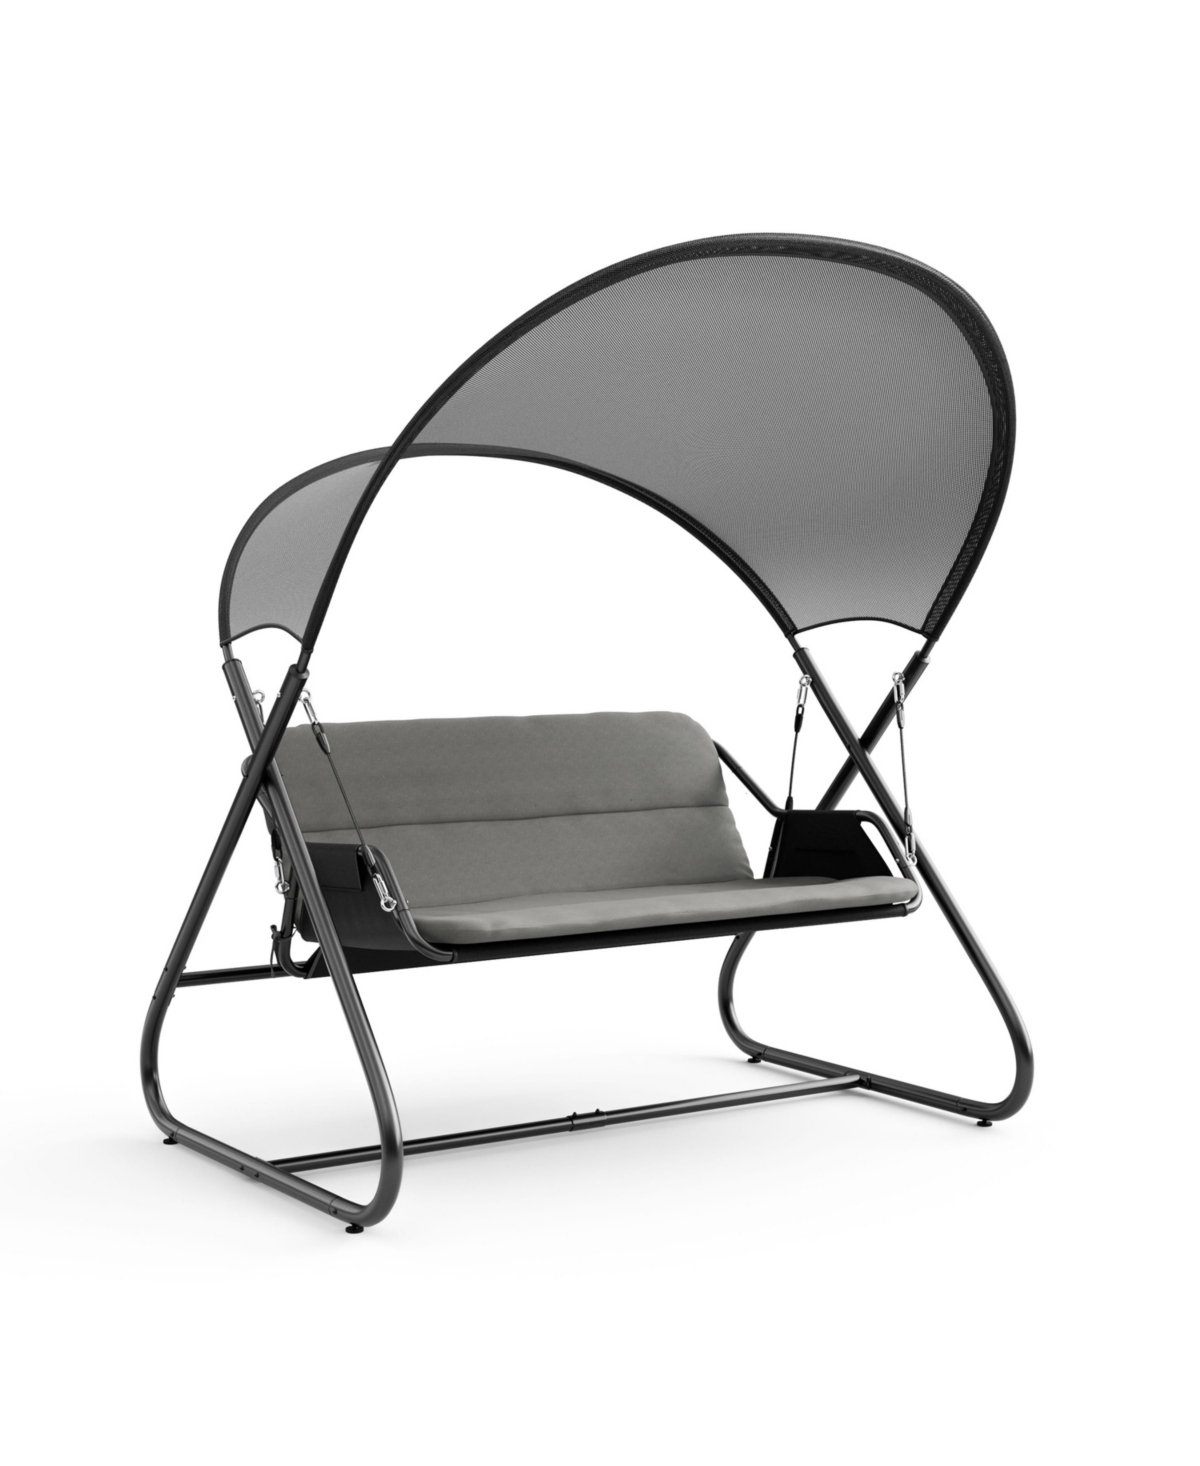 Furniture Of America 74.75" Steel Swing Bench With Mesh Canopy Cushions In Black